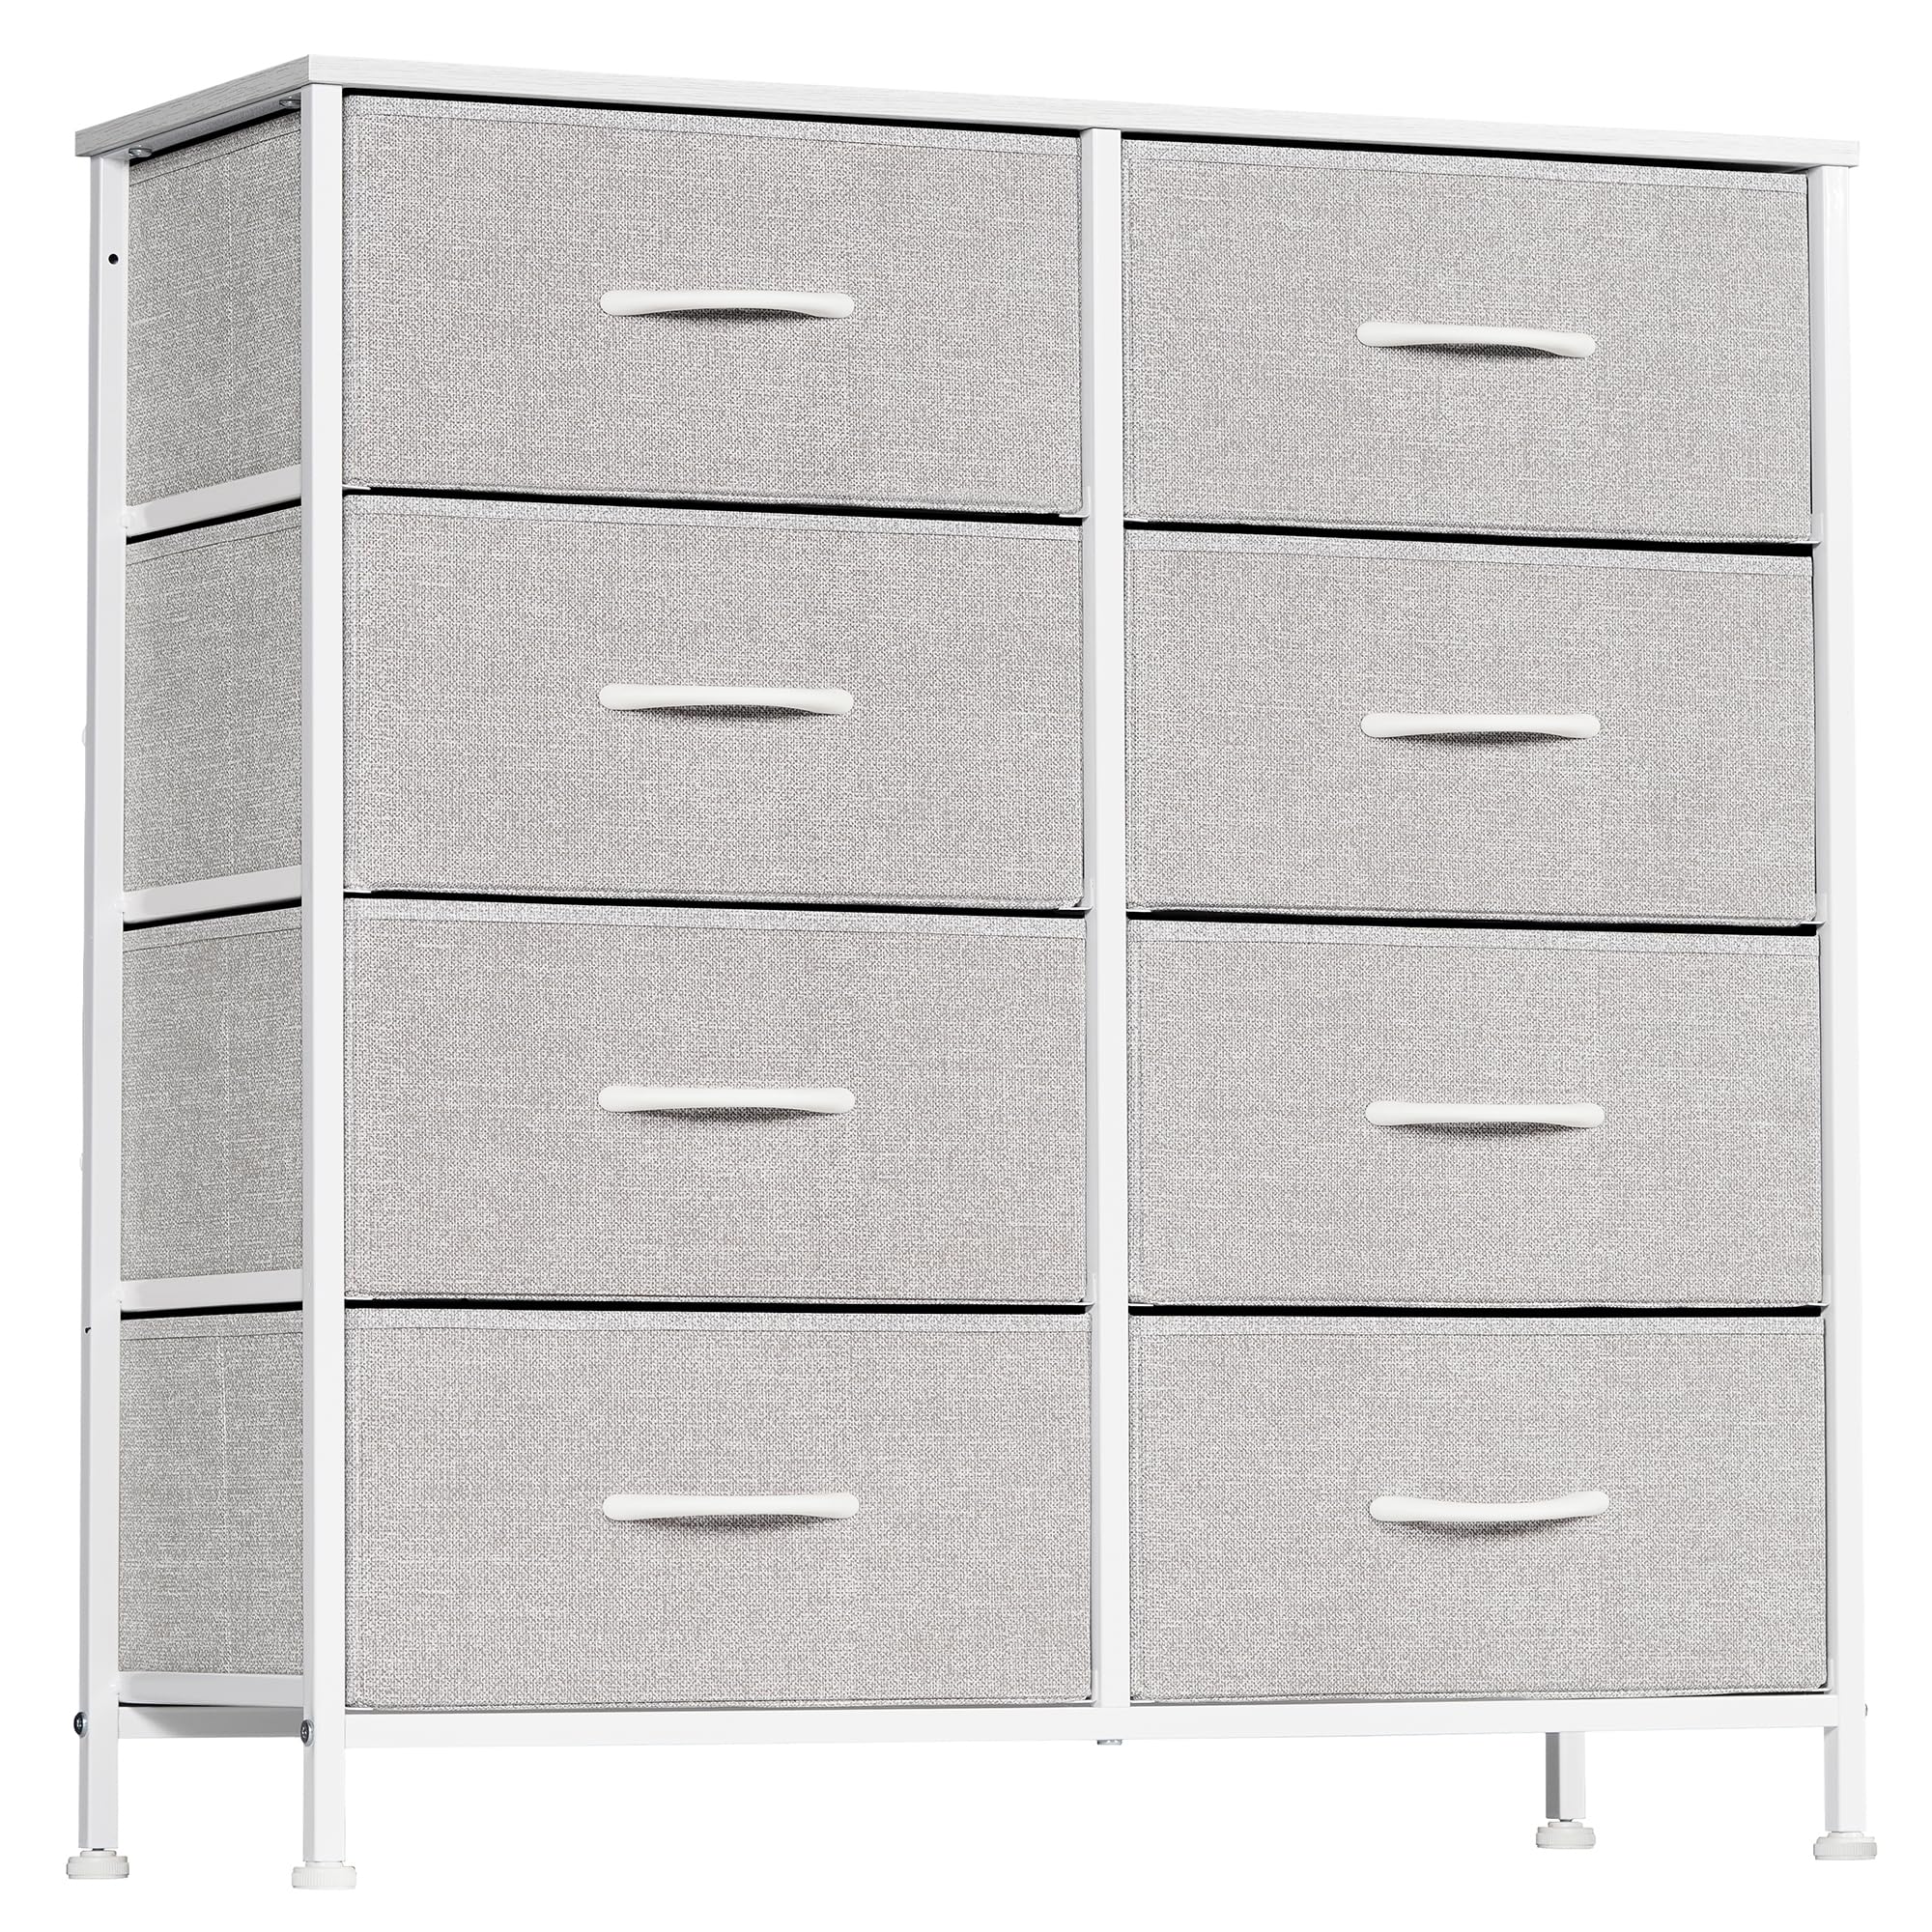 LYNCOHOME Dresser for Bedroom with 8 Drawers, Fabric Dresser for Baby Kids, Dresser Organizer, Sturdy Steel Frame, Lightweight and Movable Chest of Drawers, Snow Gray